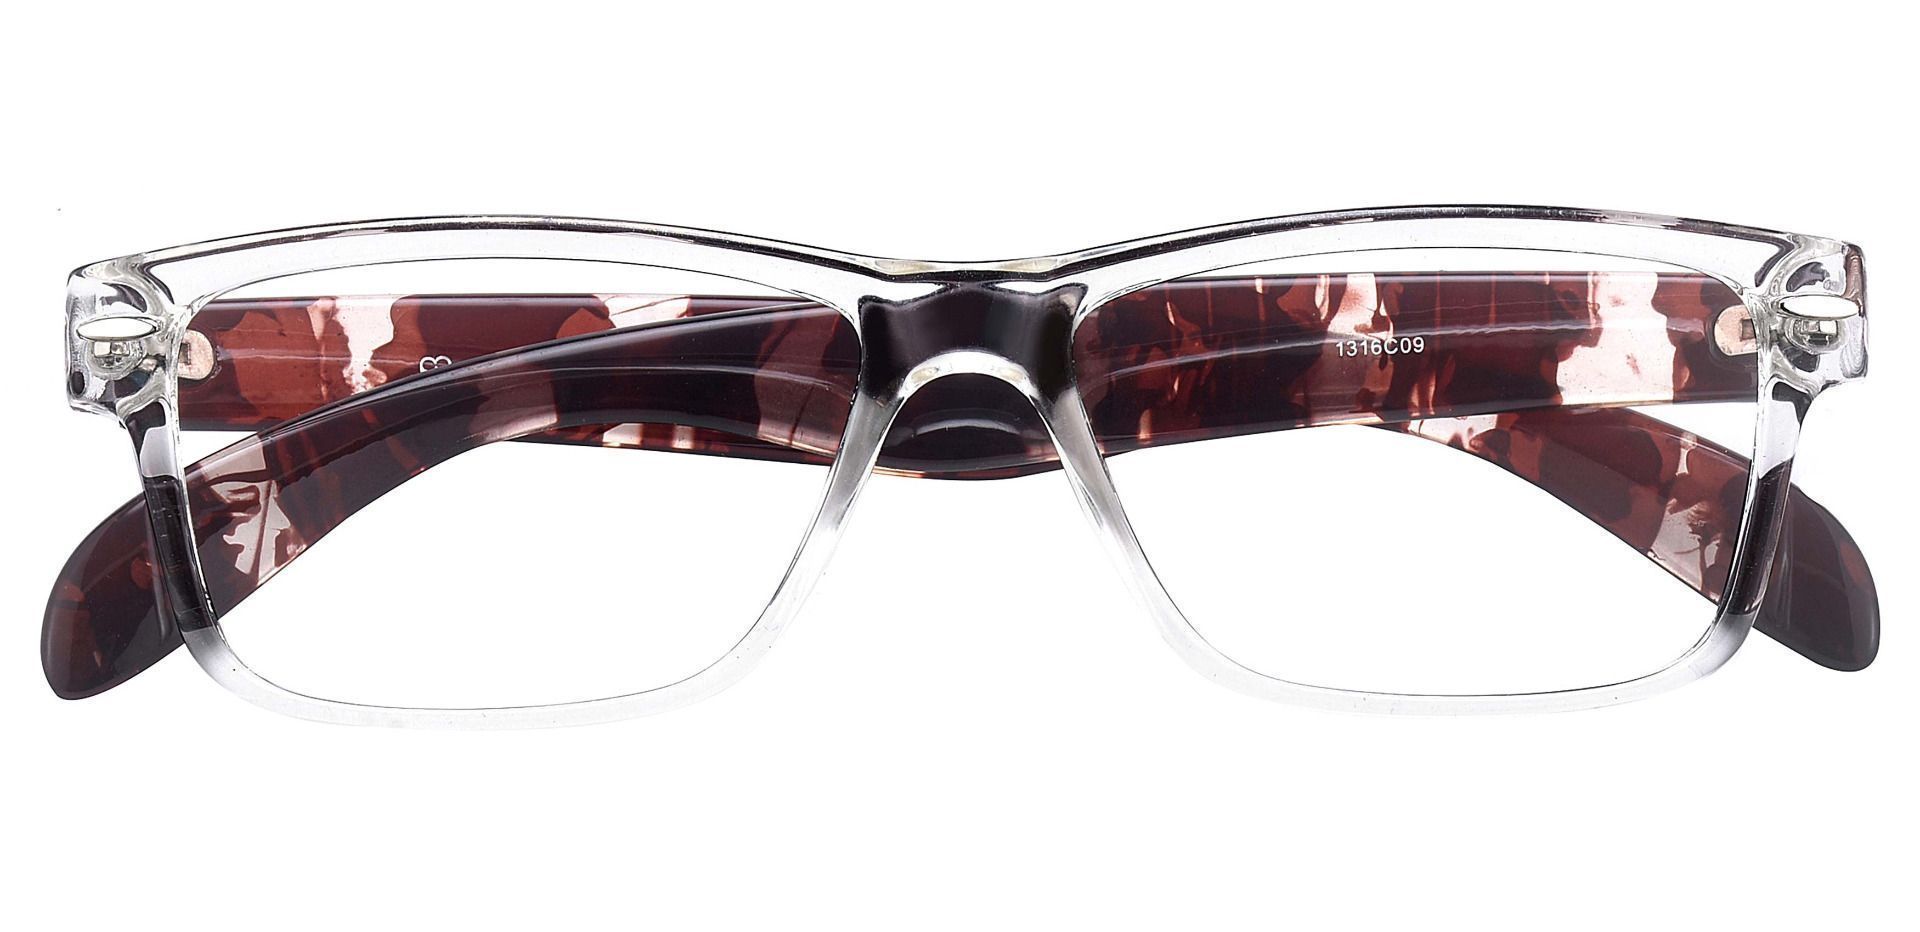 Tate Rectangle Reading Glasses - The Frame Is Clear And Tortoise